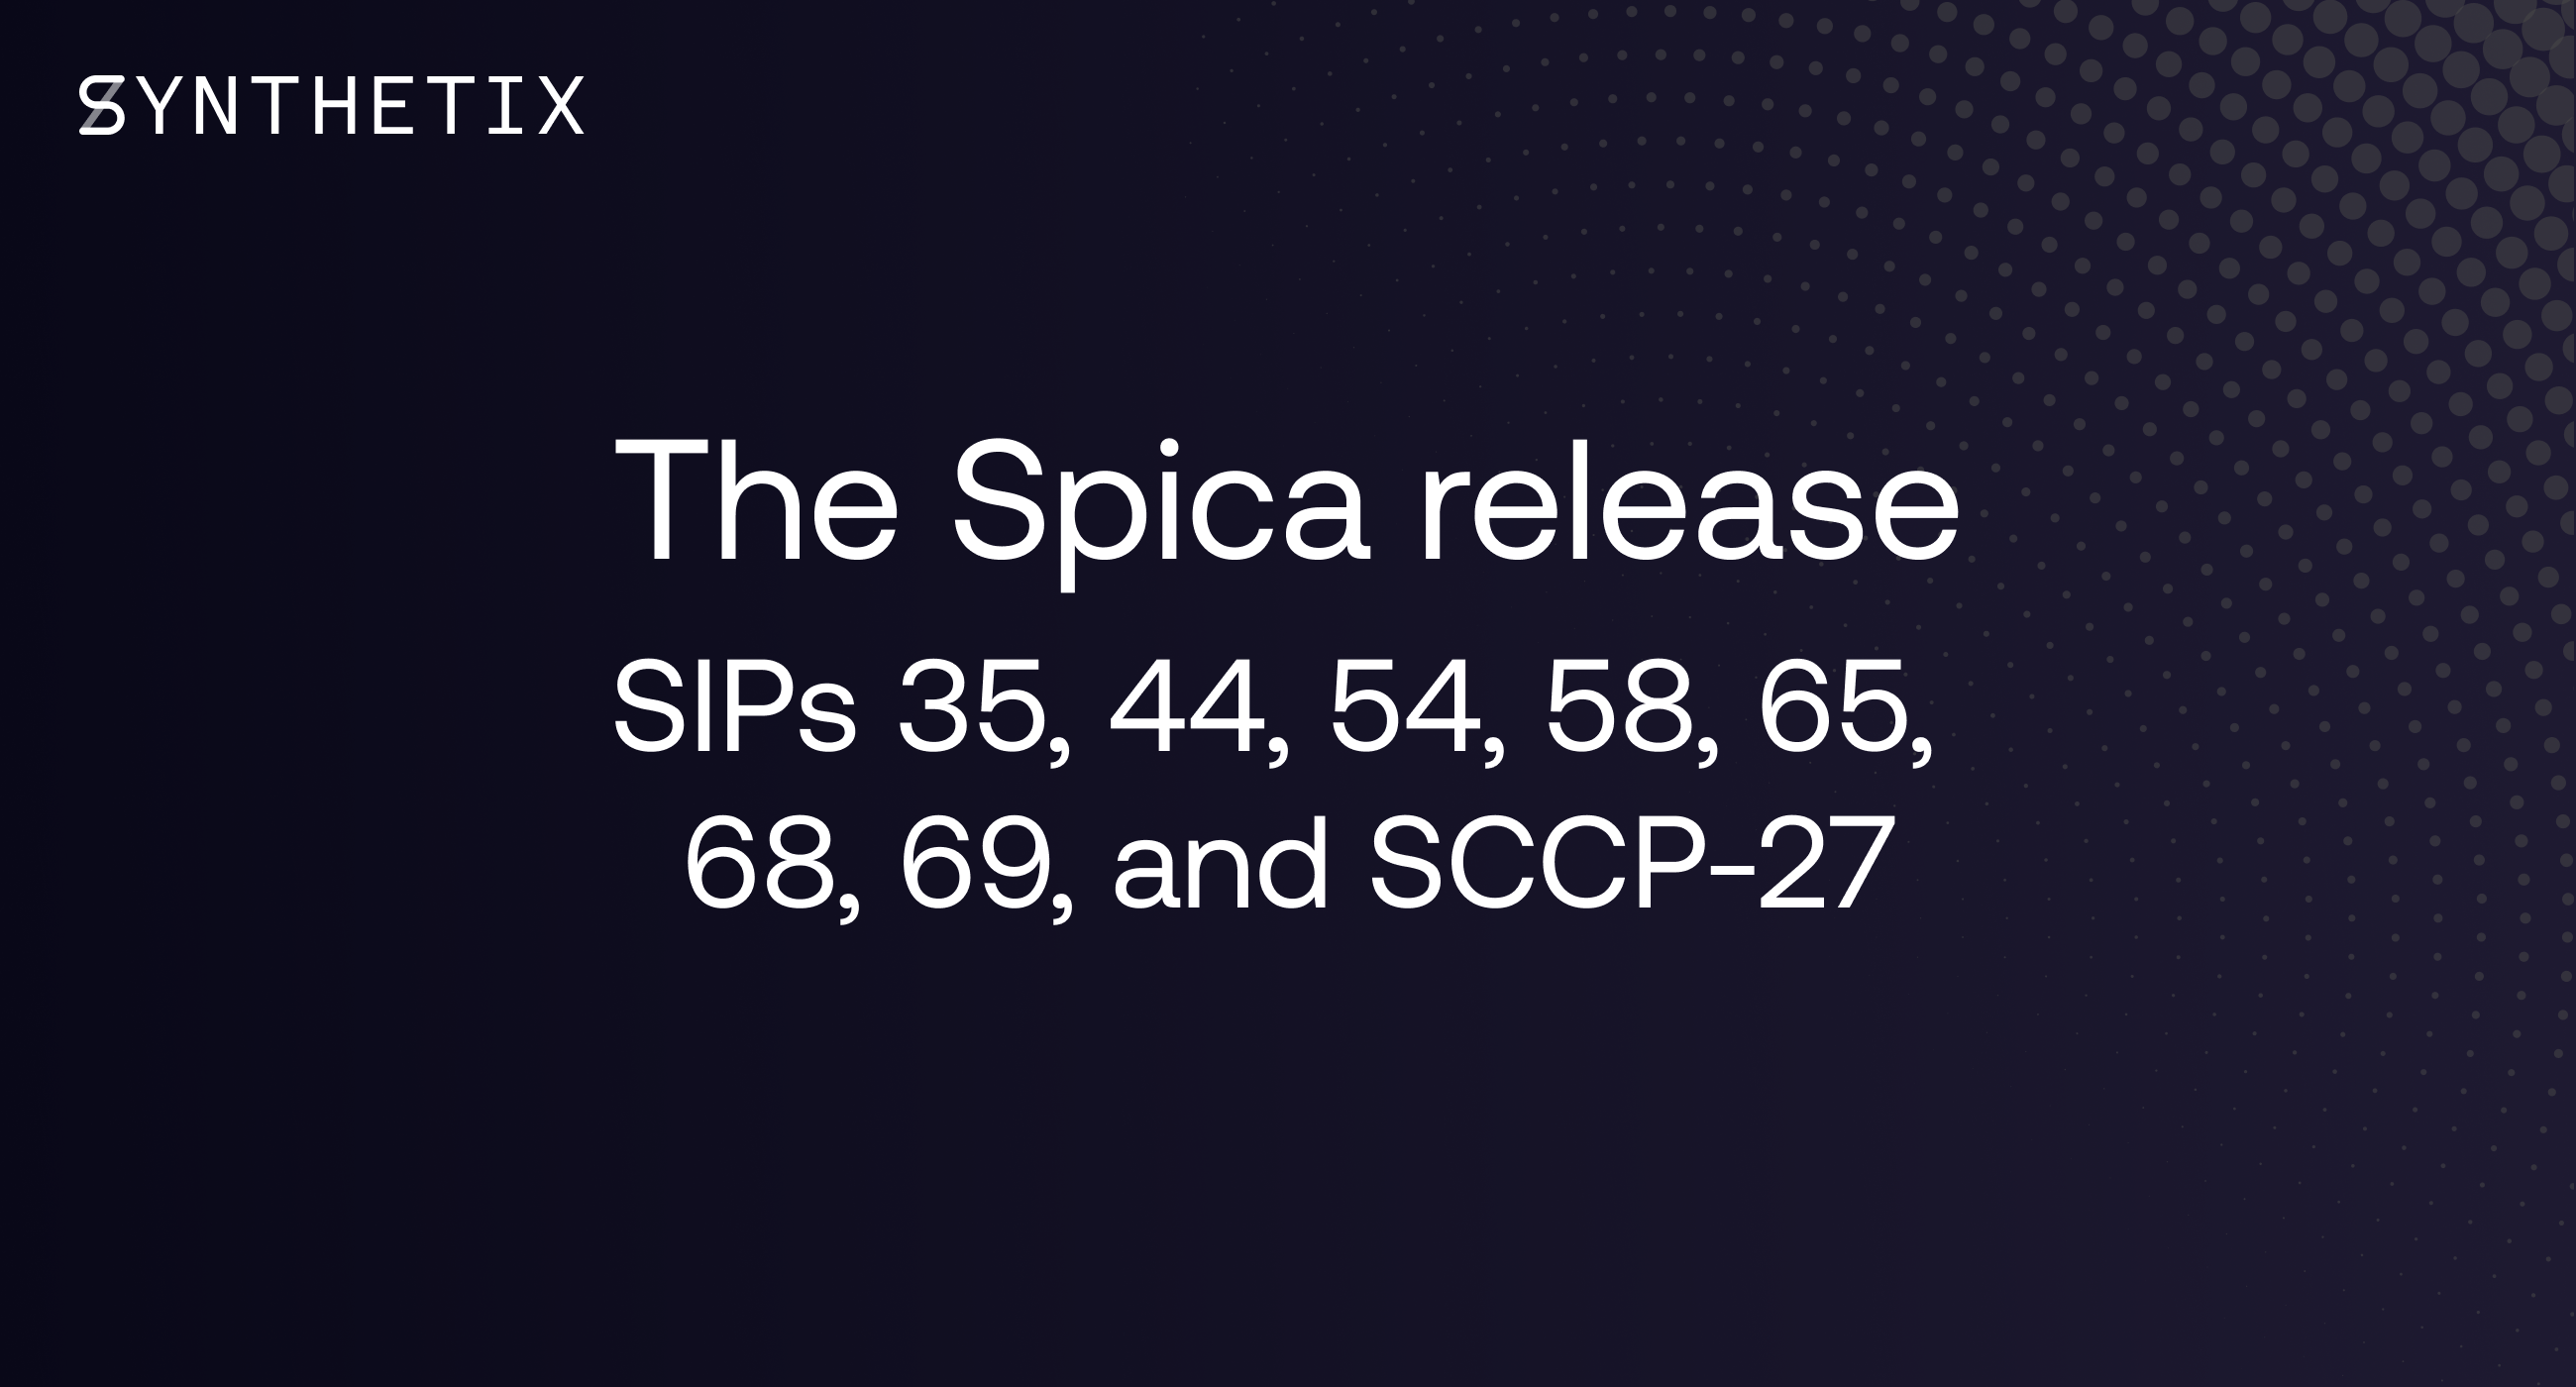 The Spica release